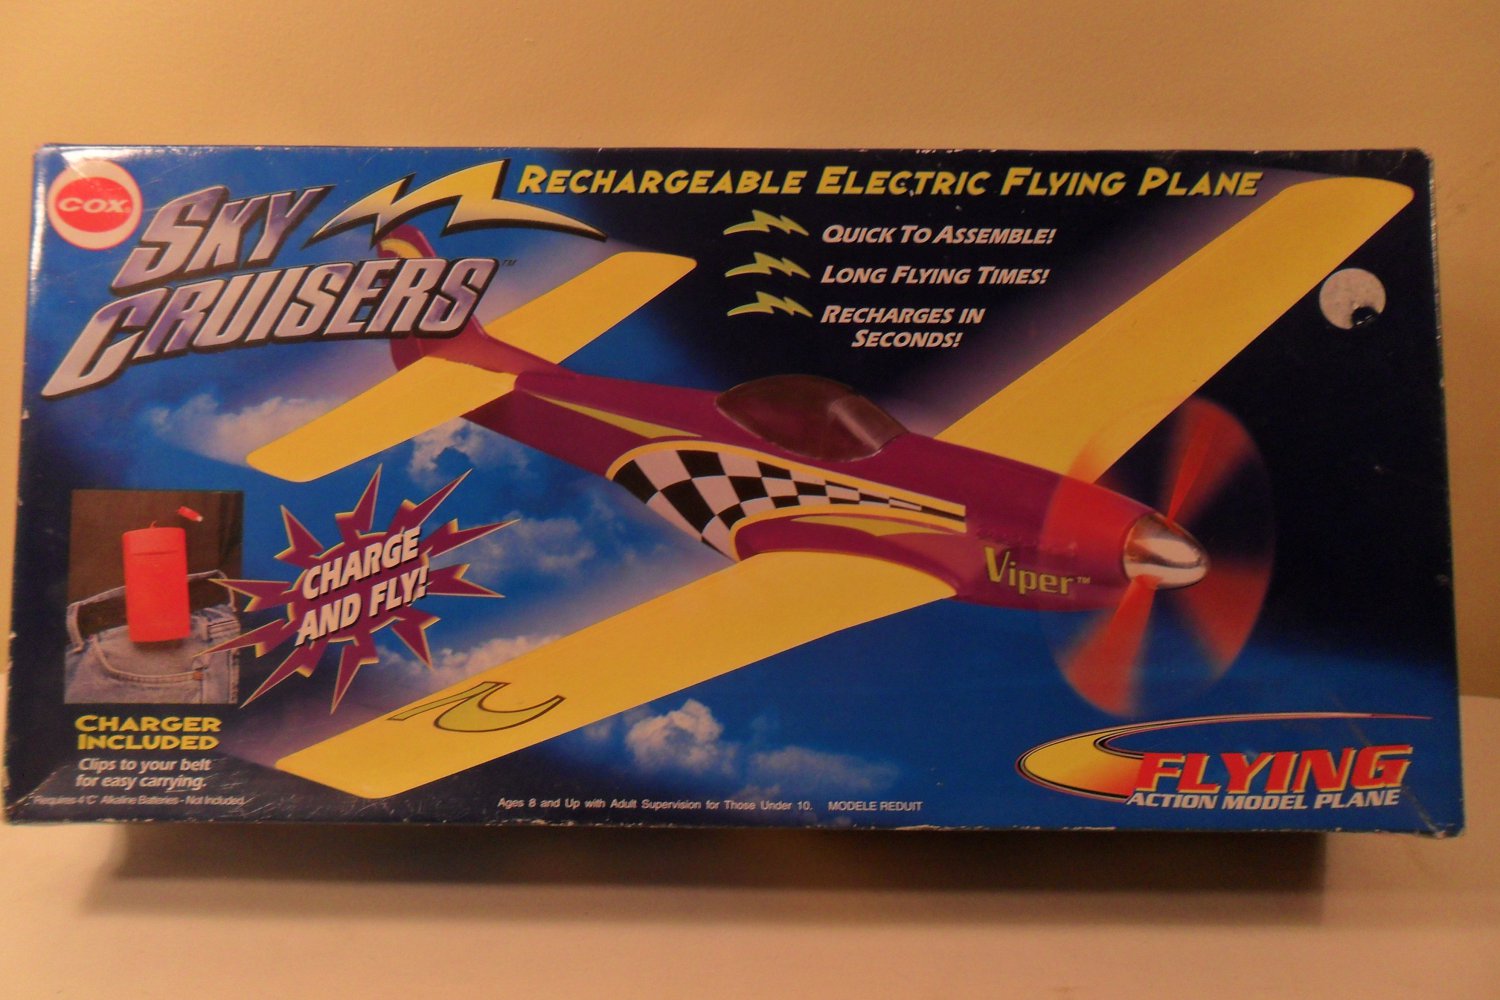 Vintage Sky Cruisers Rechargeable electric flying plane complete